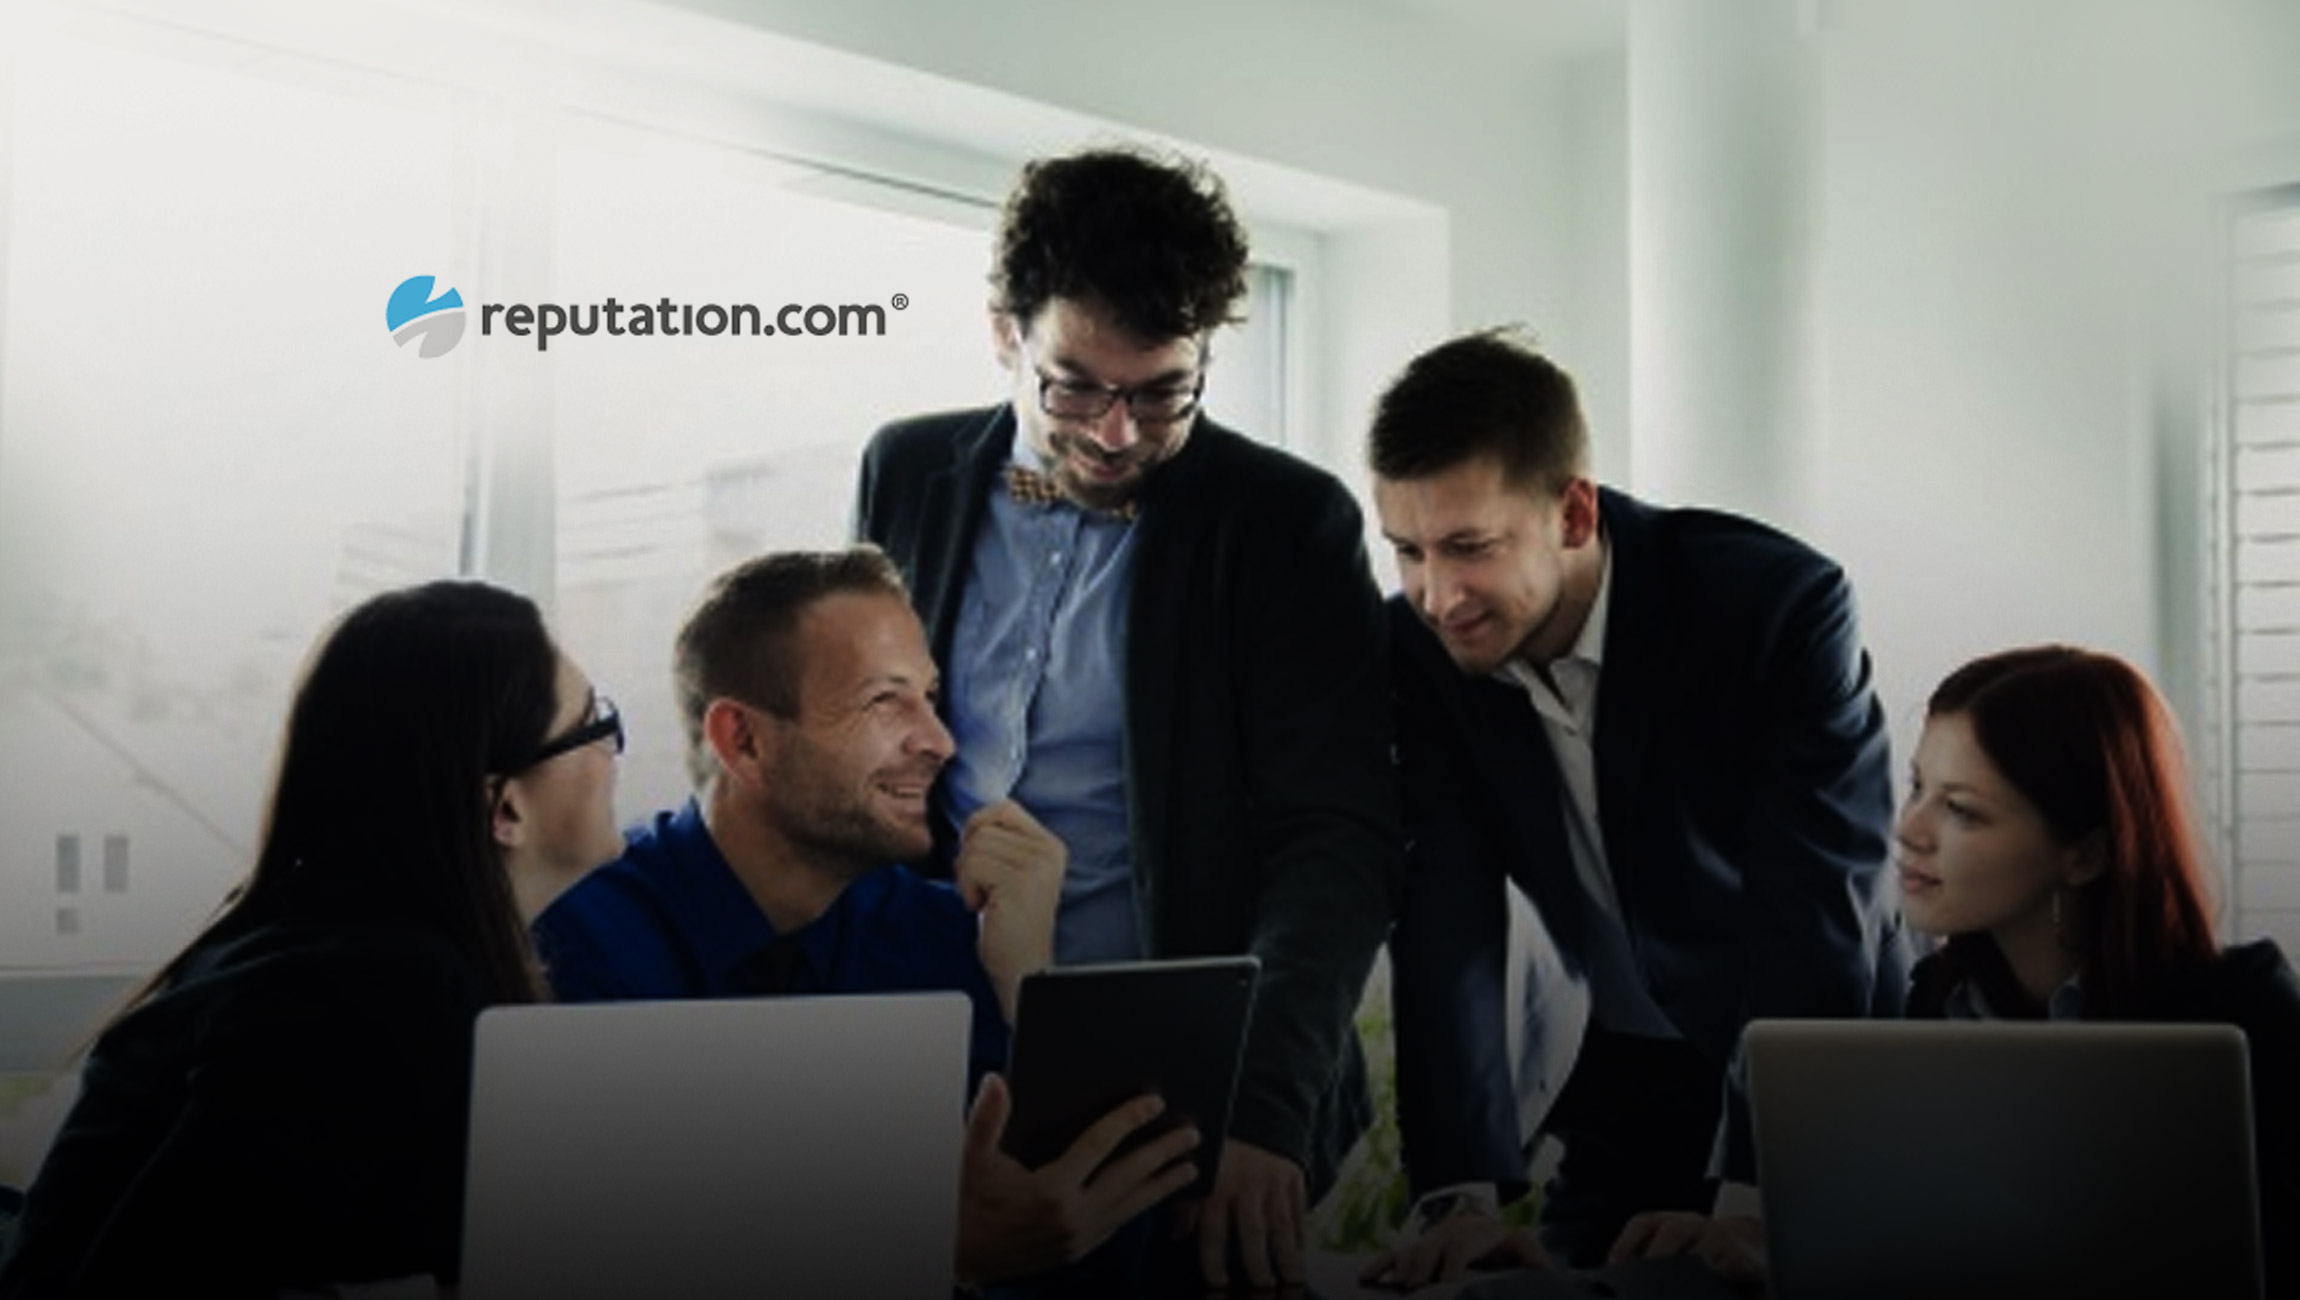 Reputation.com Named a Leader in Experience Management Software, Online Reputation Management Software, and Social Media Suites by Real Users on G2